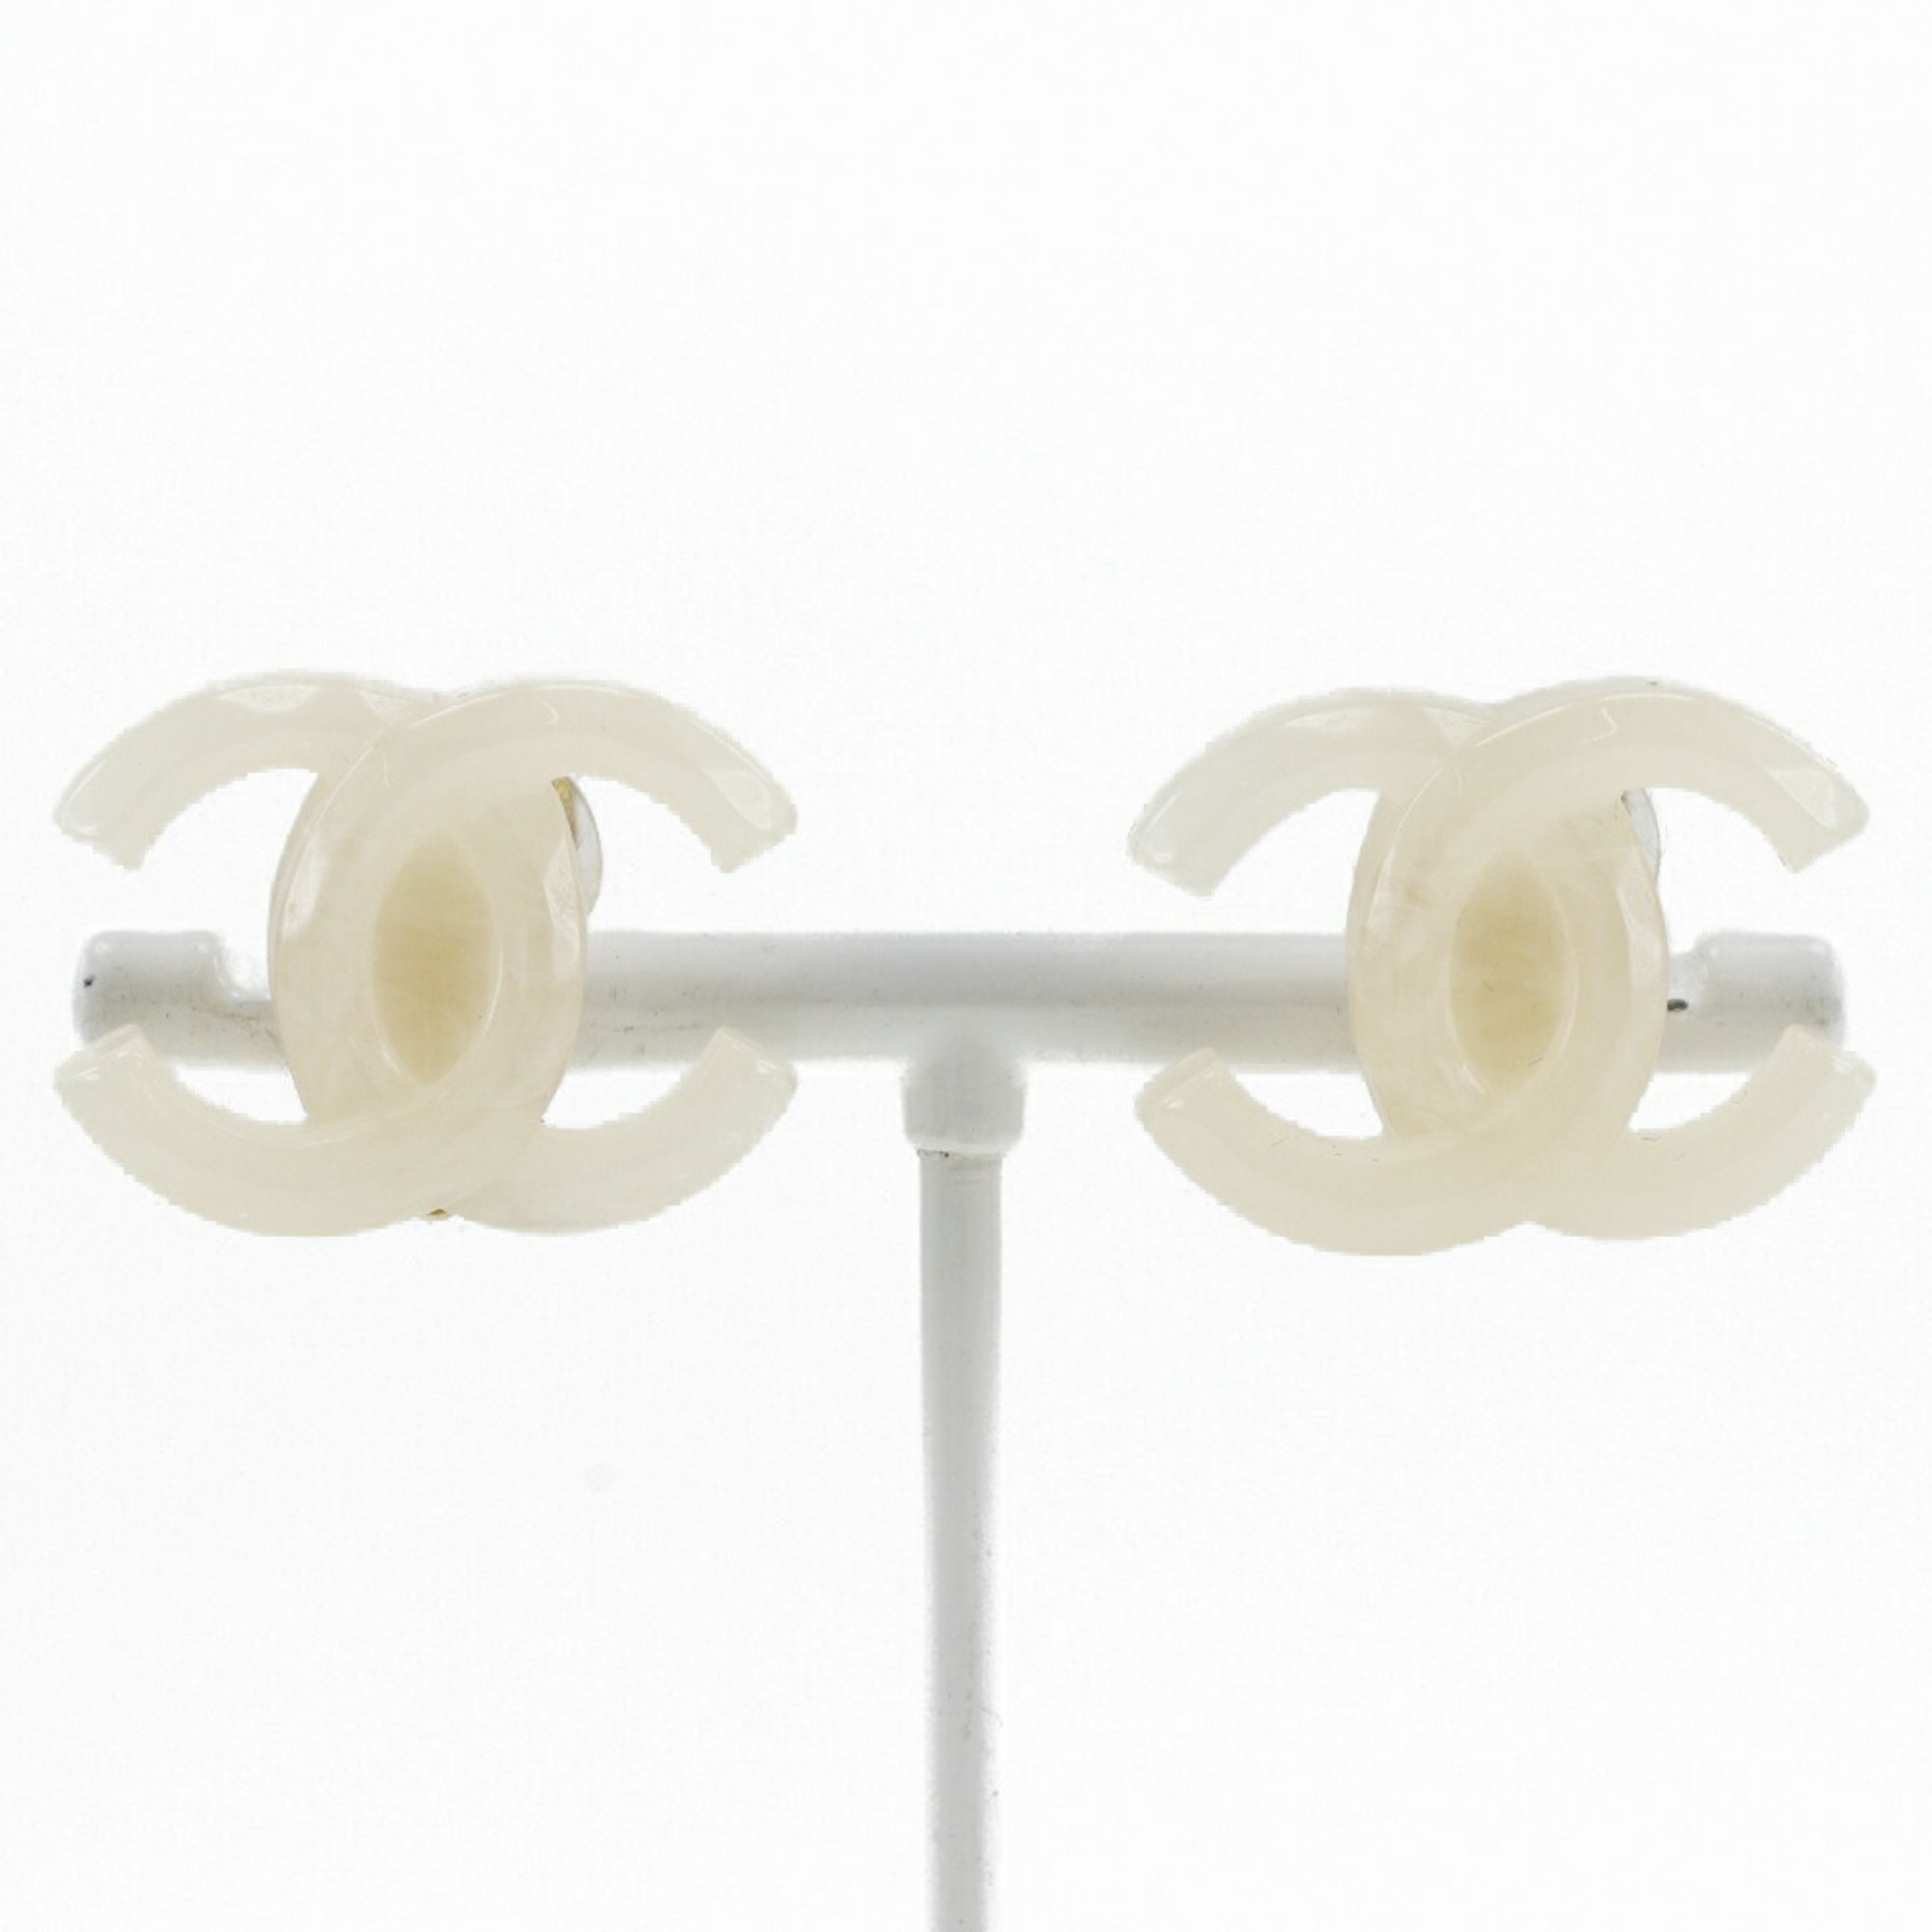 CHANEL COCO Mark Earrings Plastic Made in France 2002 White 02P Approx. 5.7g Women's